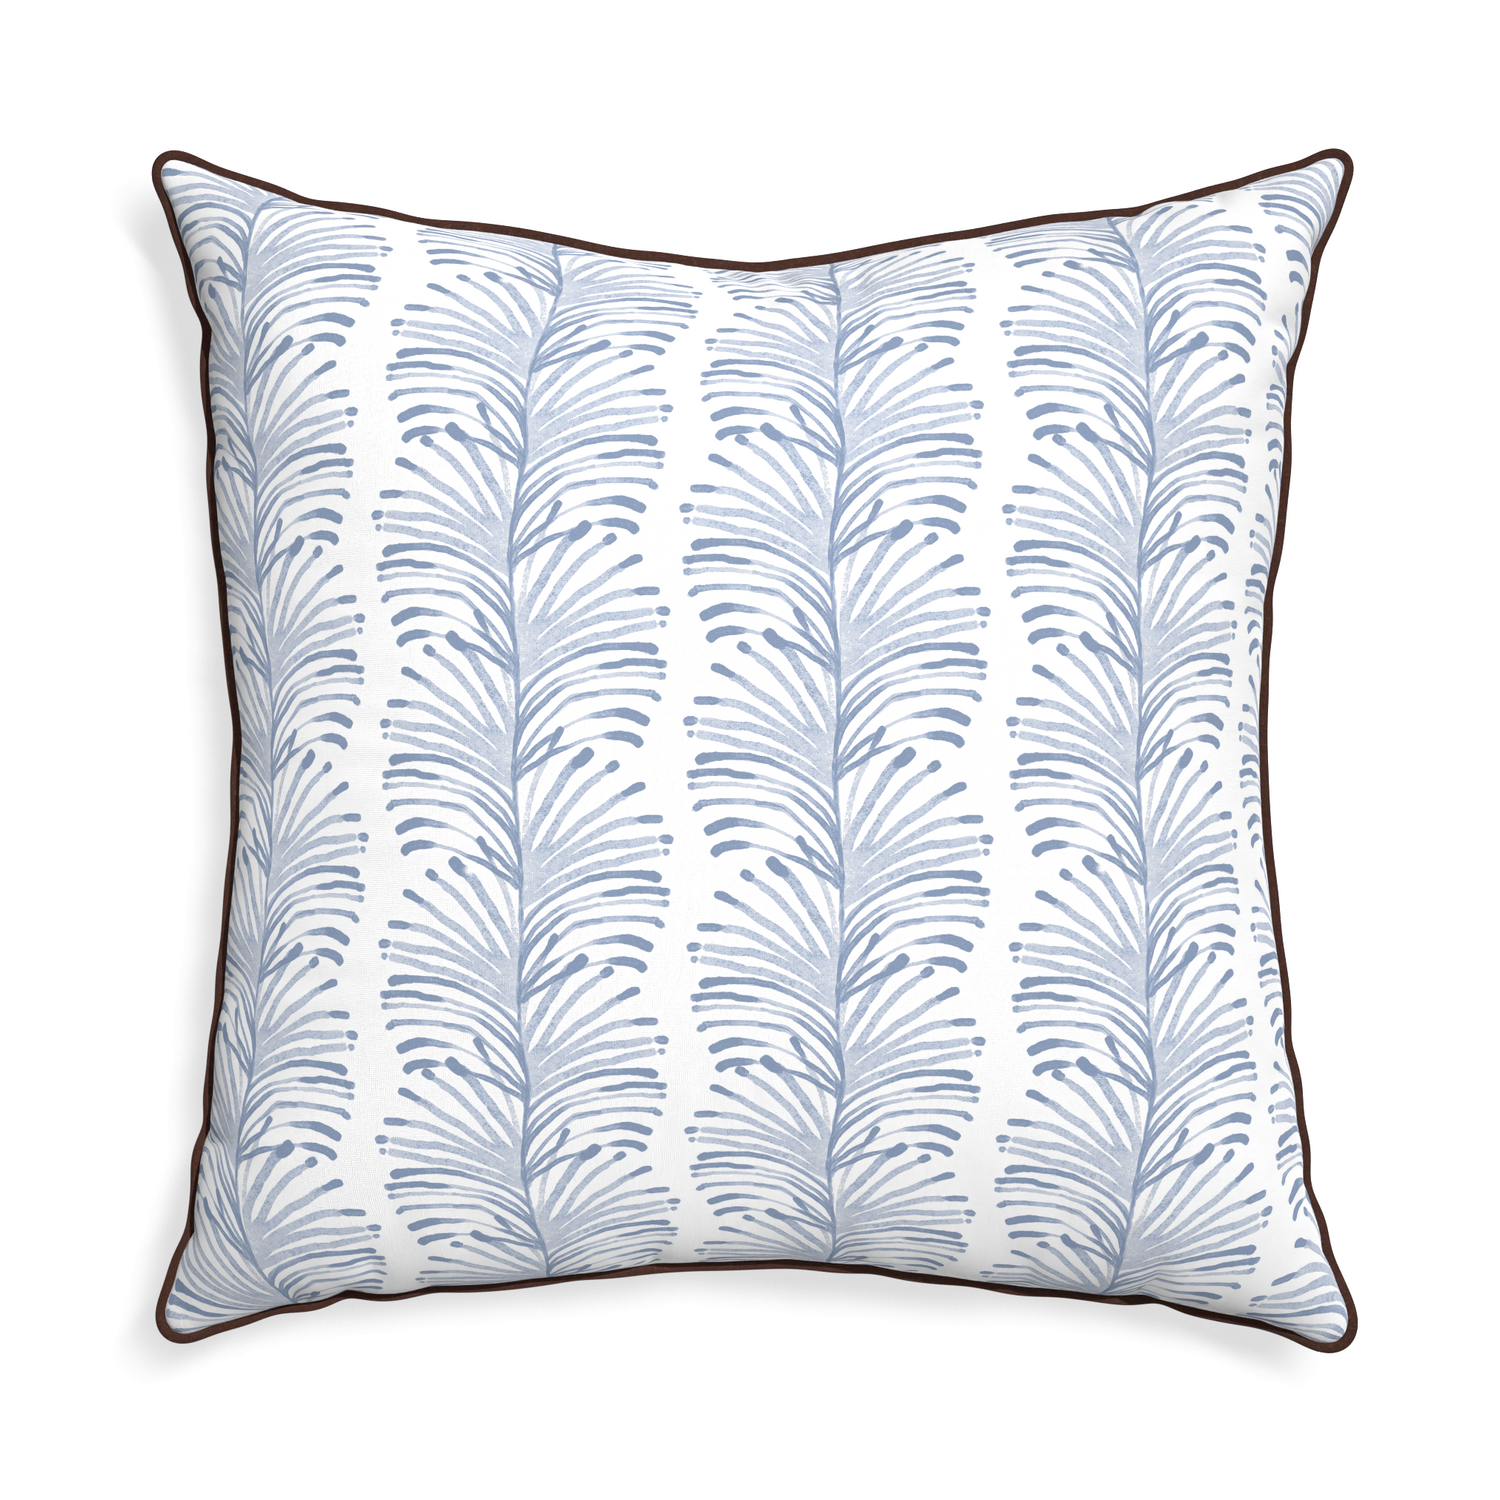 Euro-sham emma sky custom pillow with w piping on white background